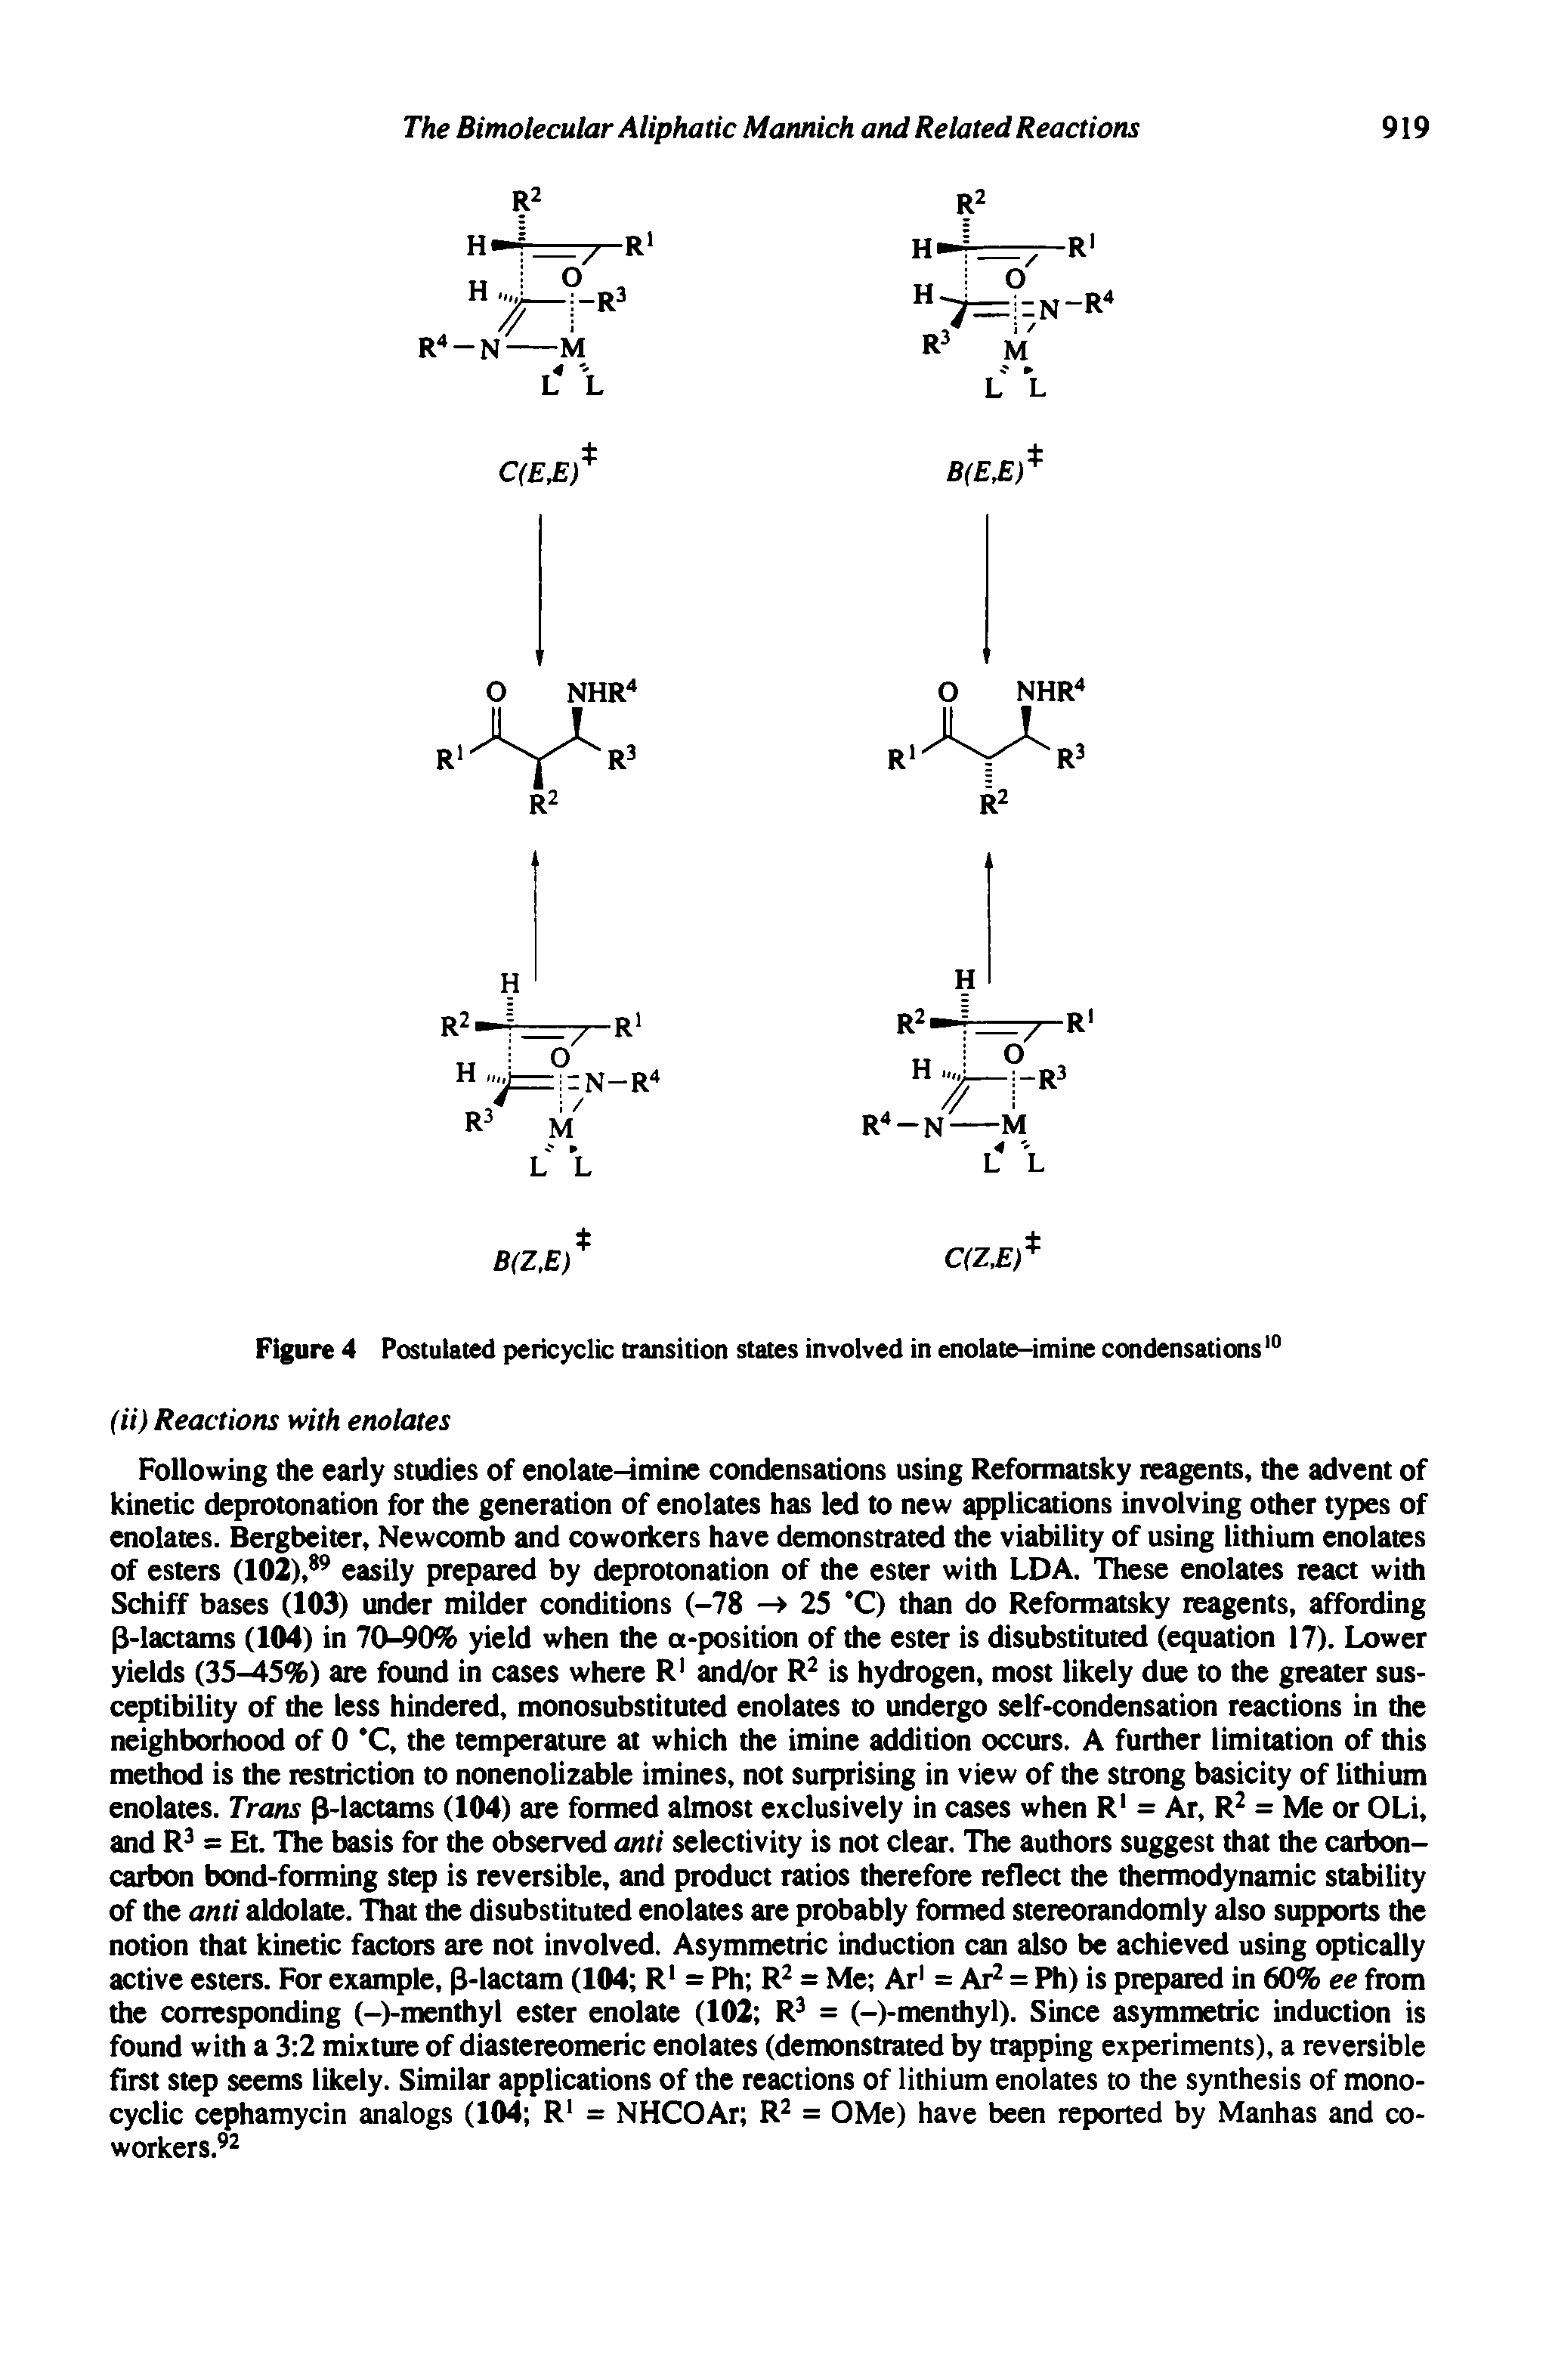 Figure 4 Postulated pericyclic transition states involved in enolate-imine condensations10 (ii) Reactions with enolates...